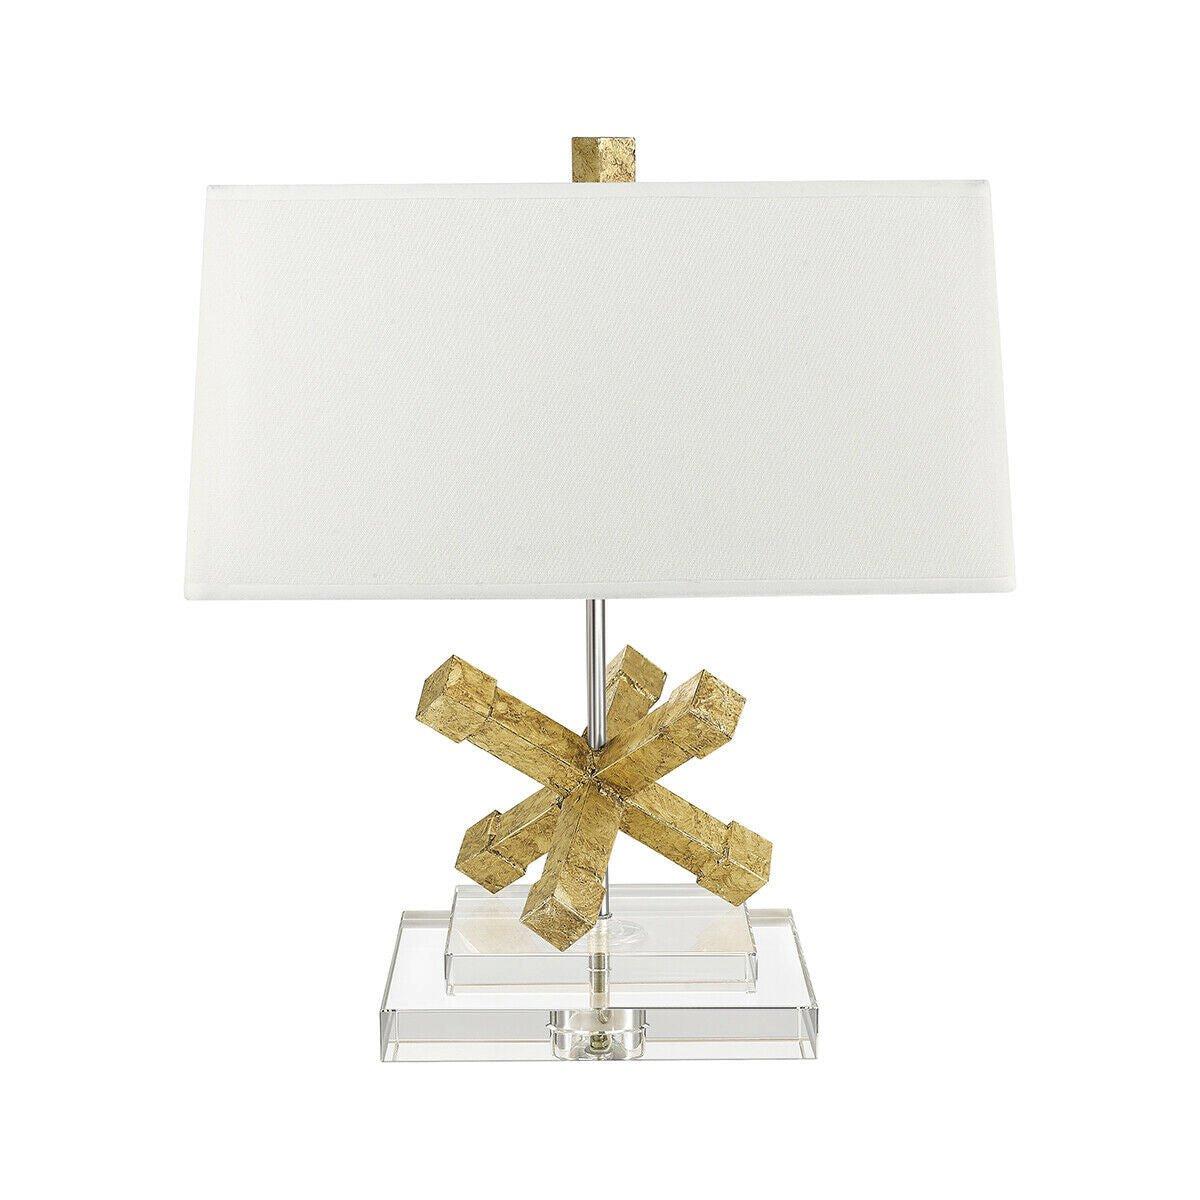 Square Table Lamp Crystal Base Cream Tapered Shade Distressed Gold LED E27 100W